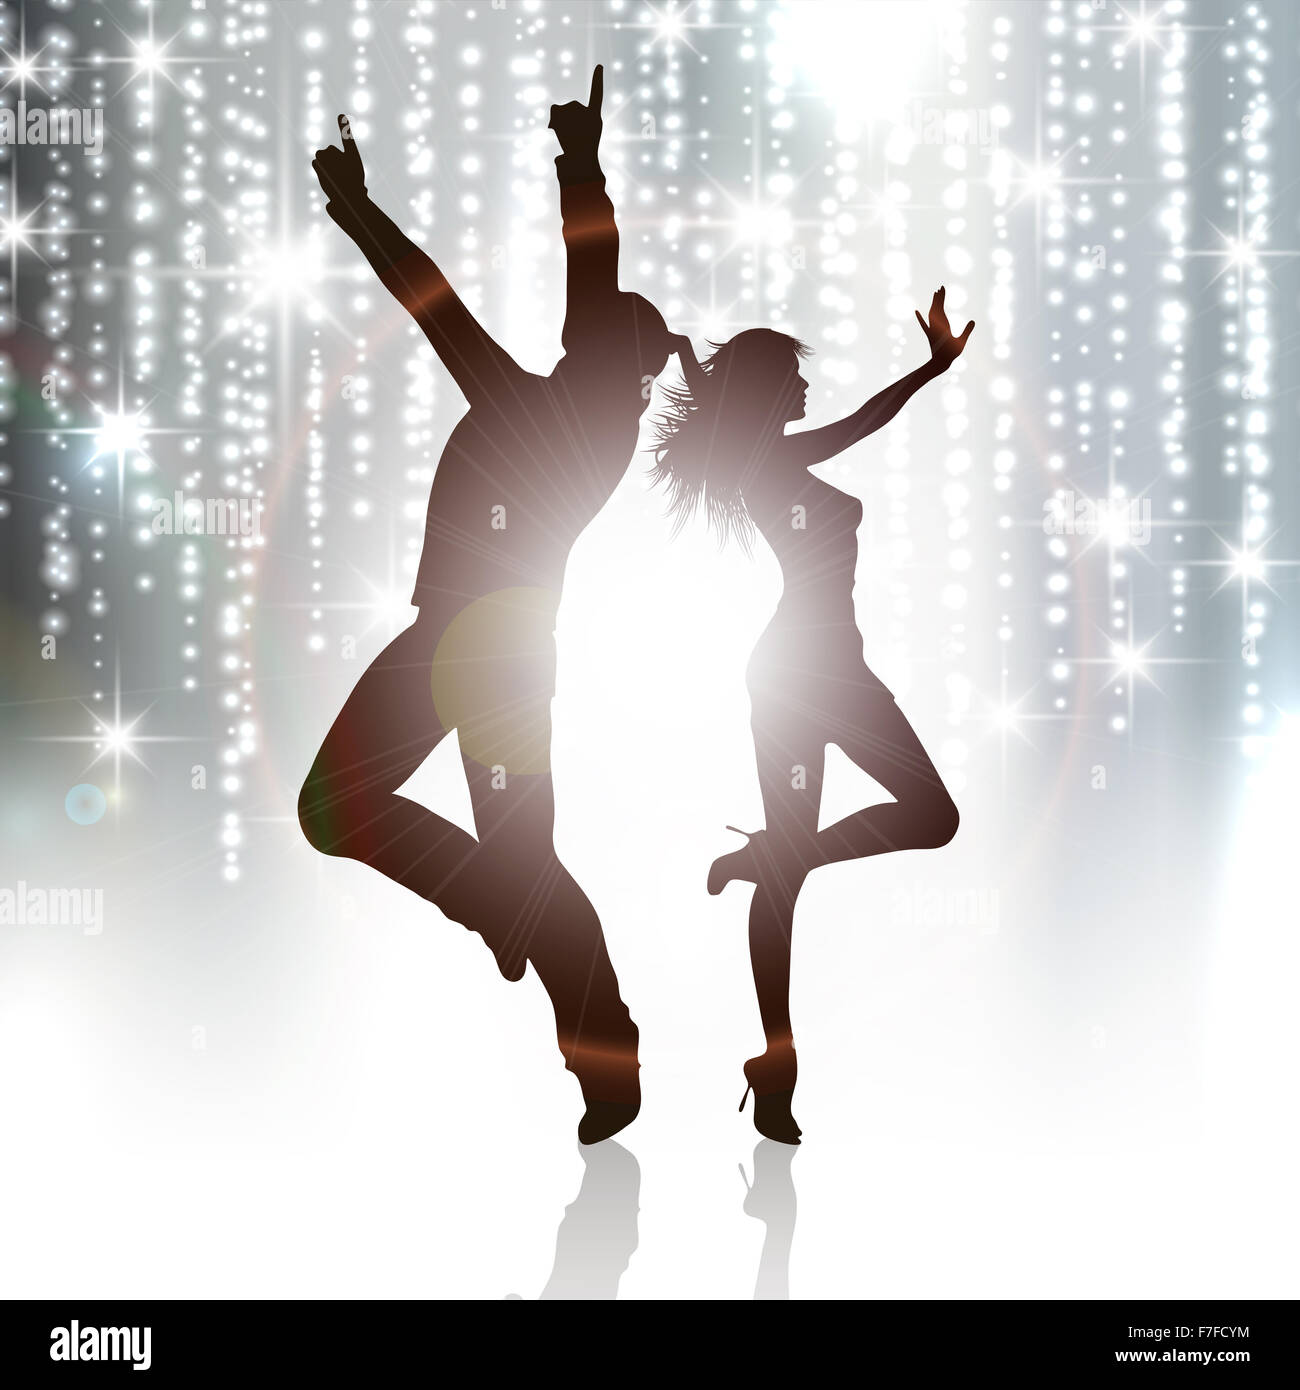 Silhouettes of people dancing on a sparkle background Stock Photo